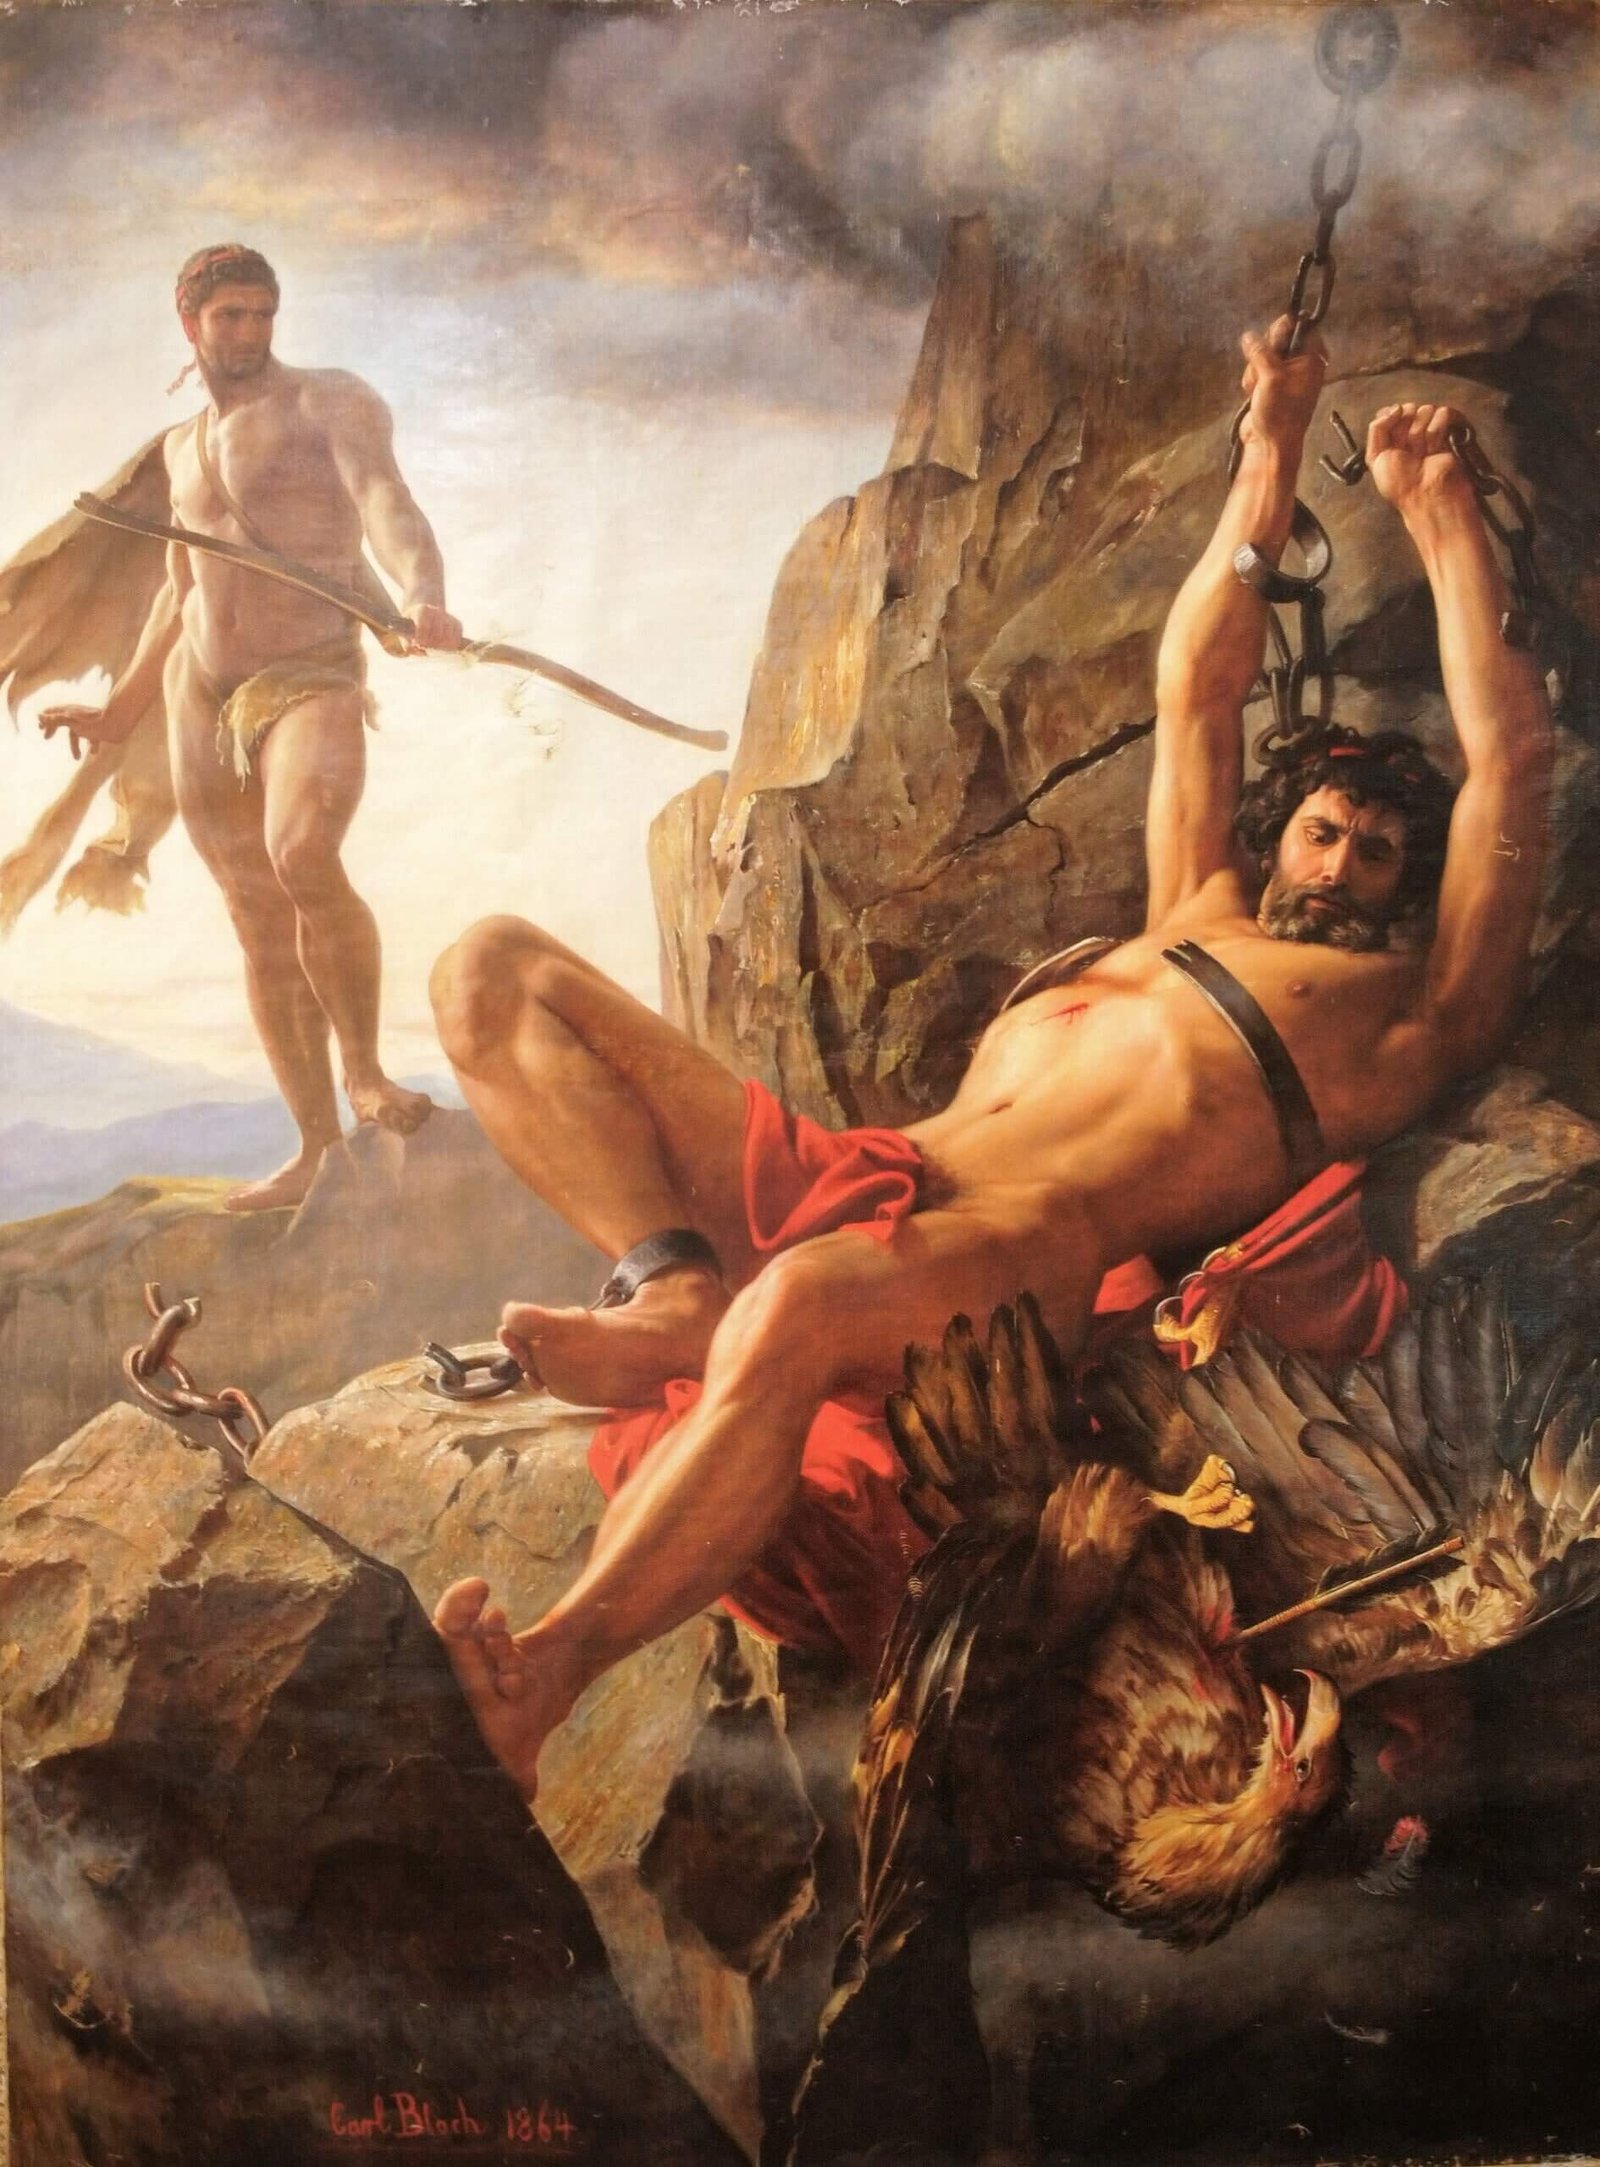 This painting represents Prometheus chained to a rock and Heracles with bow. He just had killed the eagle that was torturing the titan.